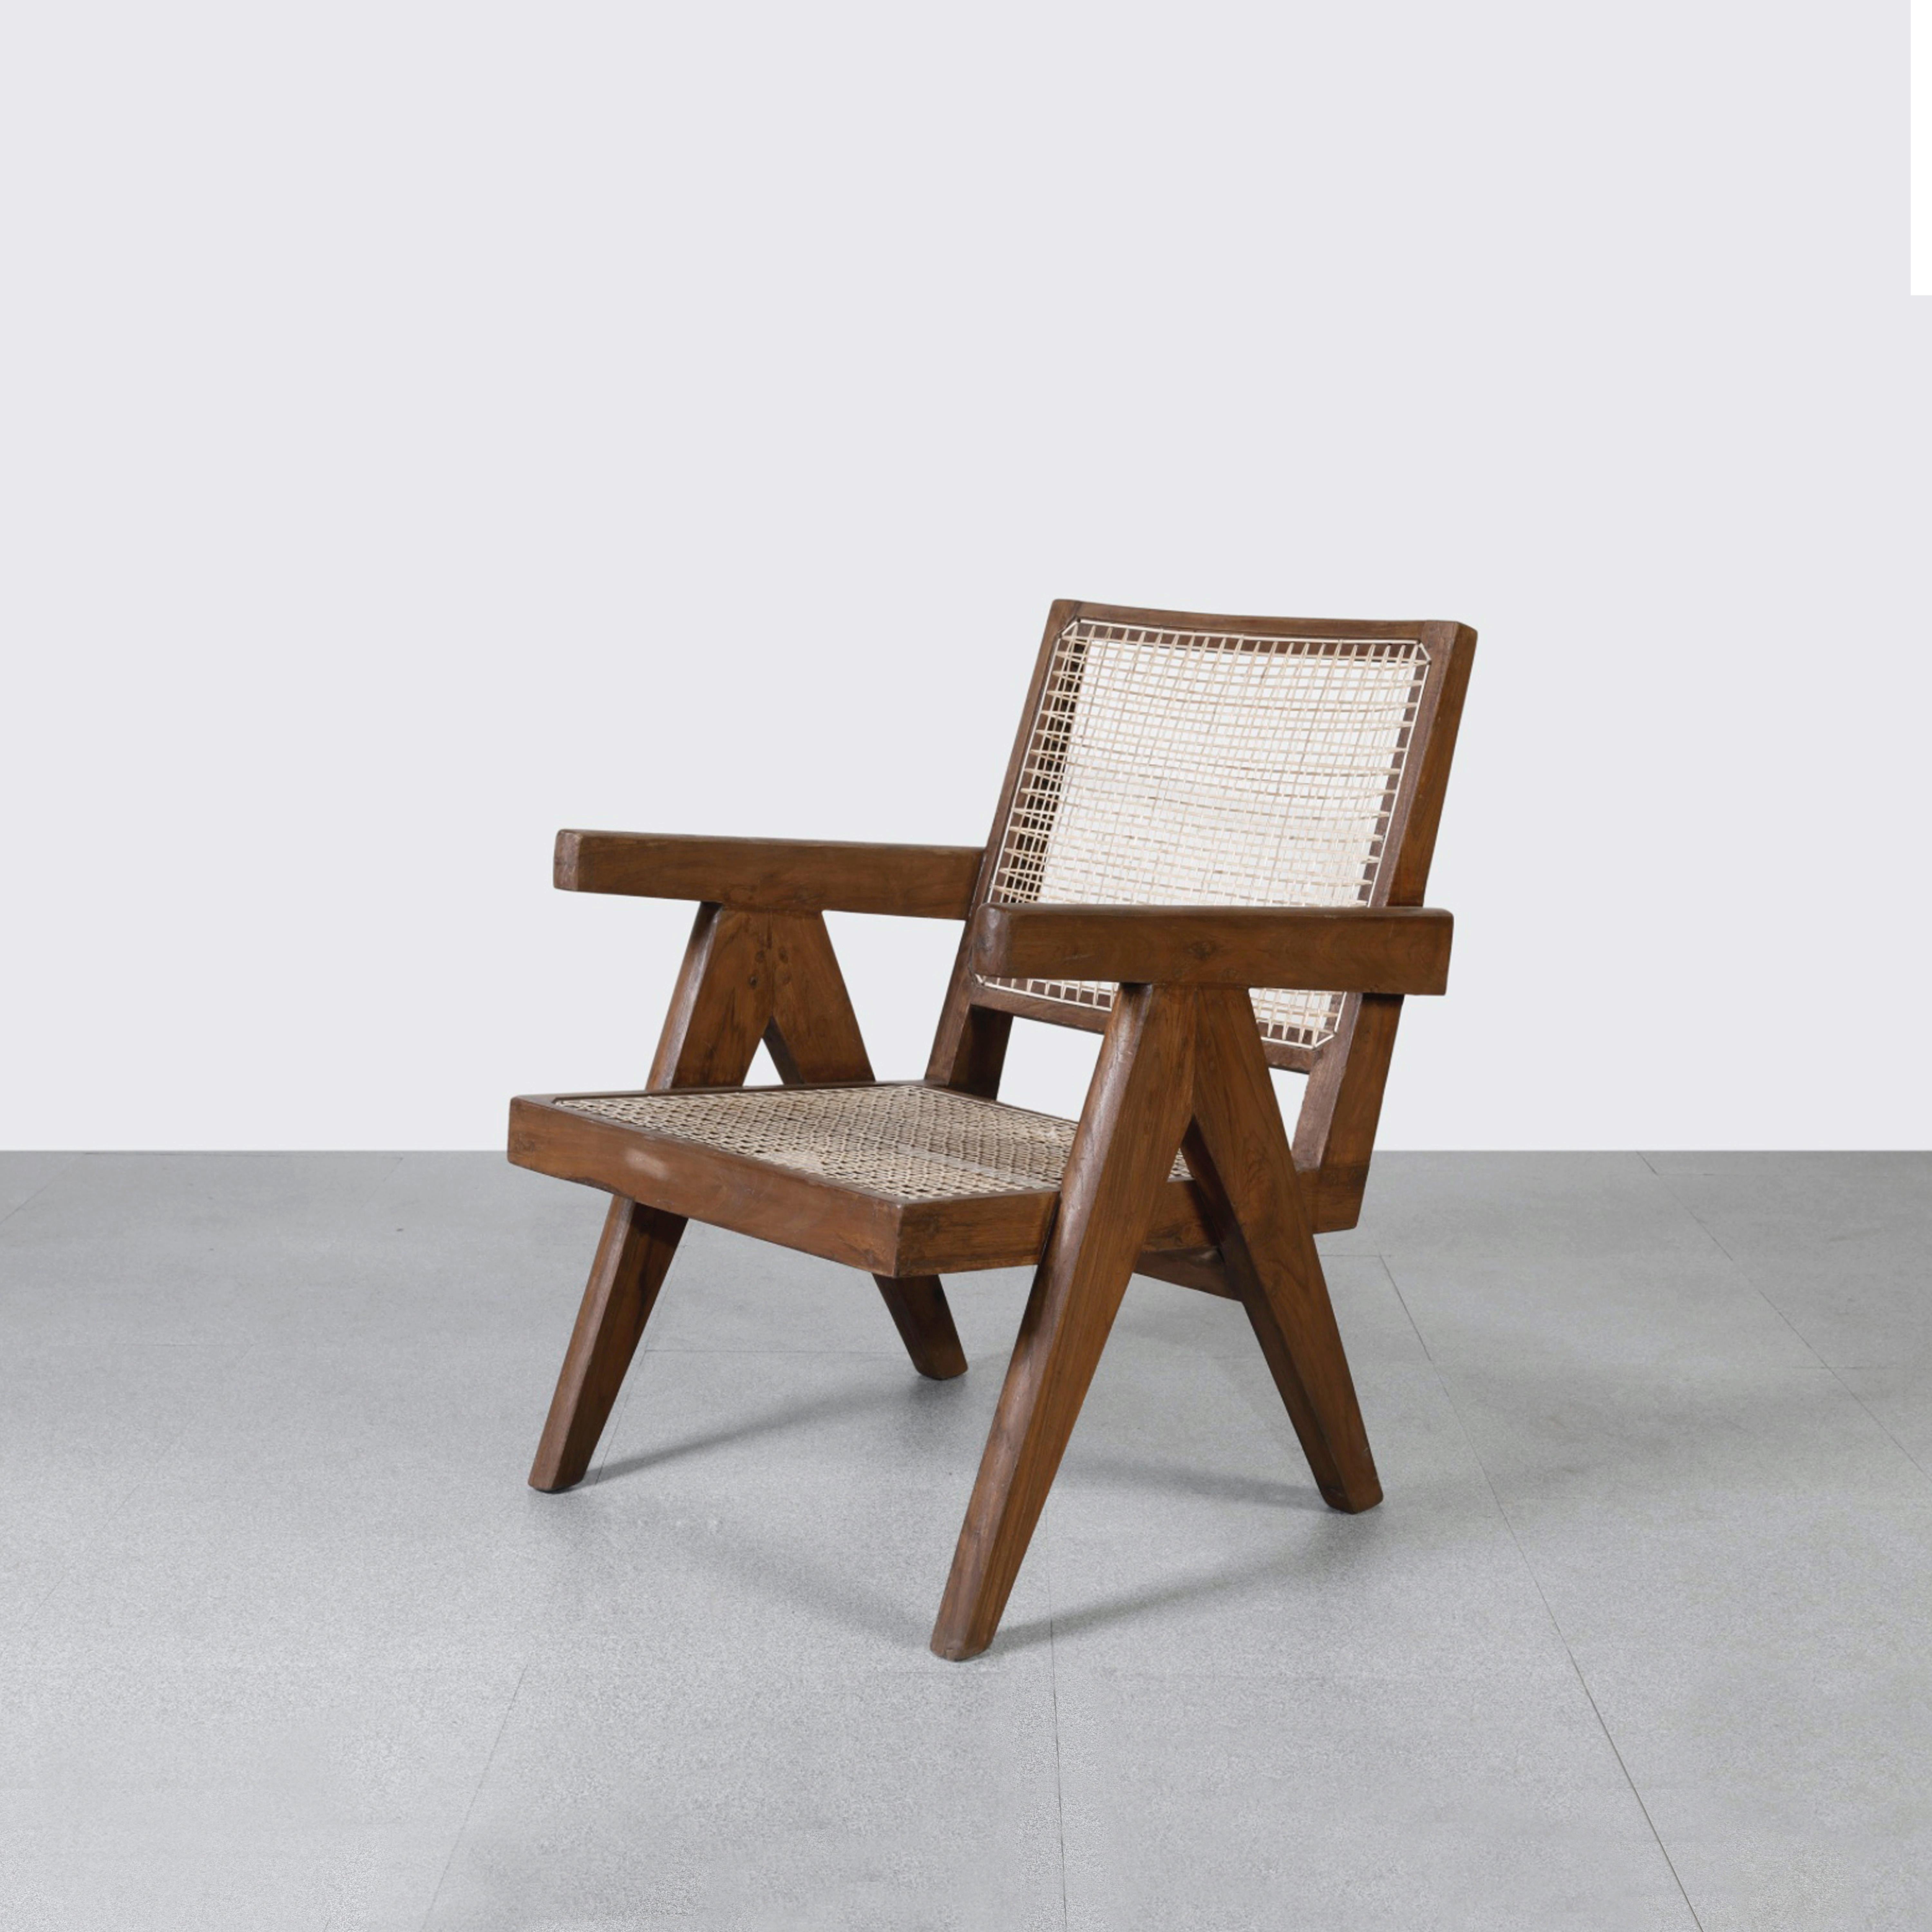 This chair is not only a fantastic piece, it’s a design statement. Finally, it’s one of the most famous of all easy chairs from Chandigarh. It is raw, simple and poetic, expressing a wonderful nonchalance. Its A-shape legs are characteristic for